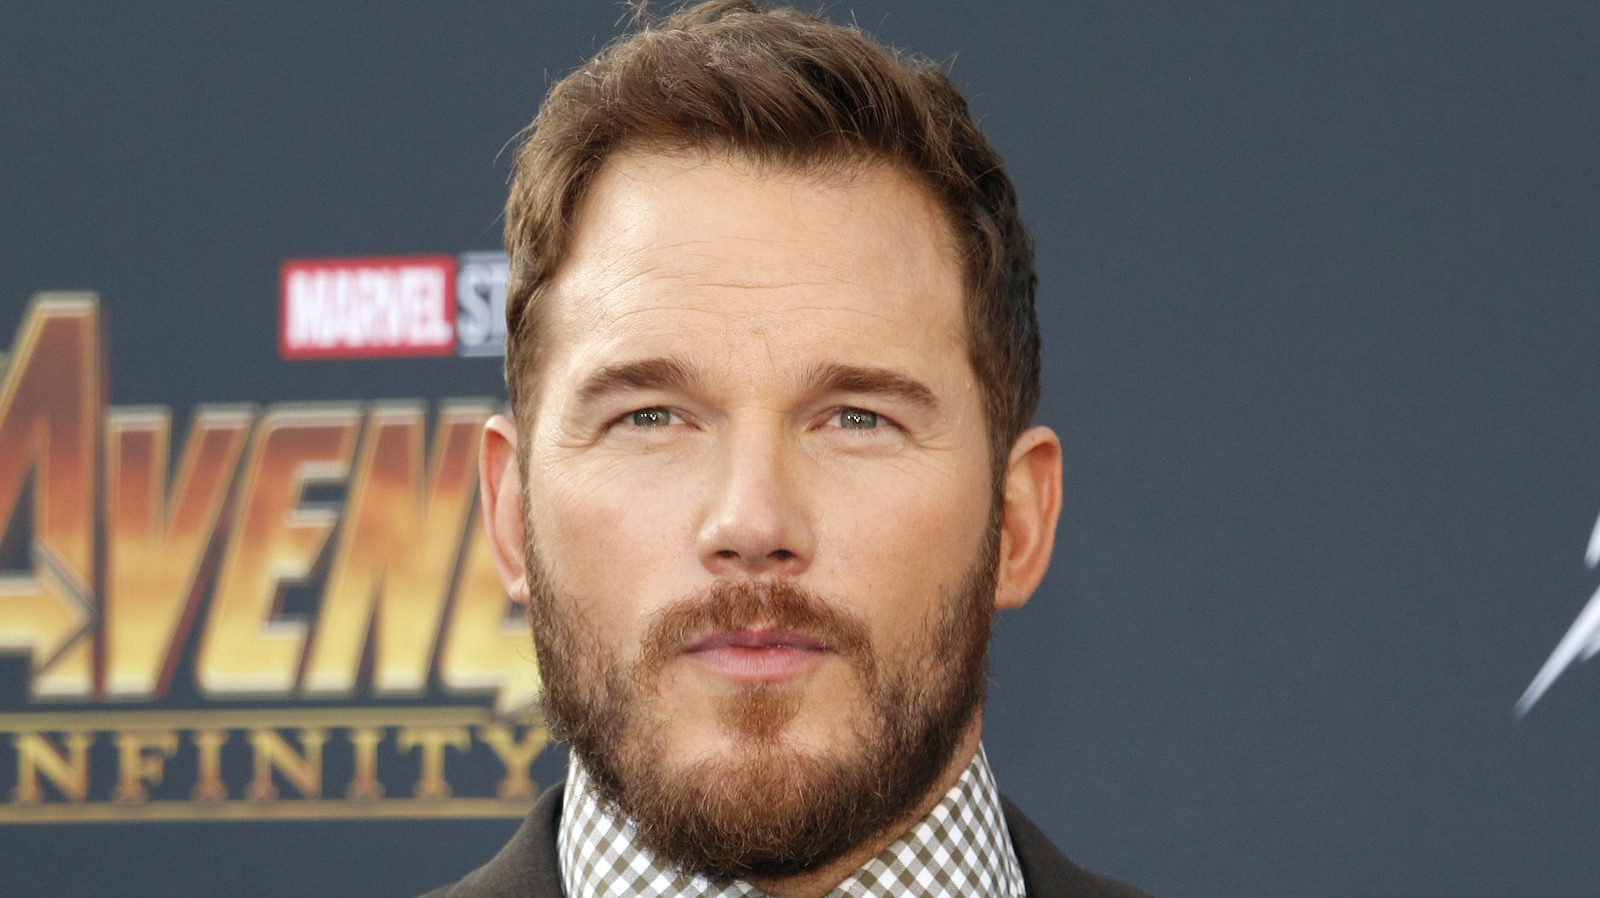 Chris Pratt Hopes Son Will 'Finally Think I'm Cool' After Guardians 3